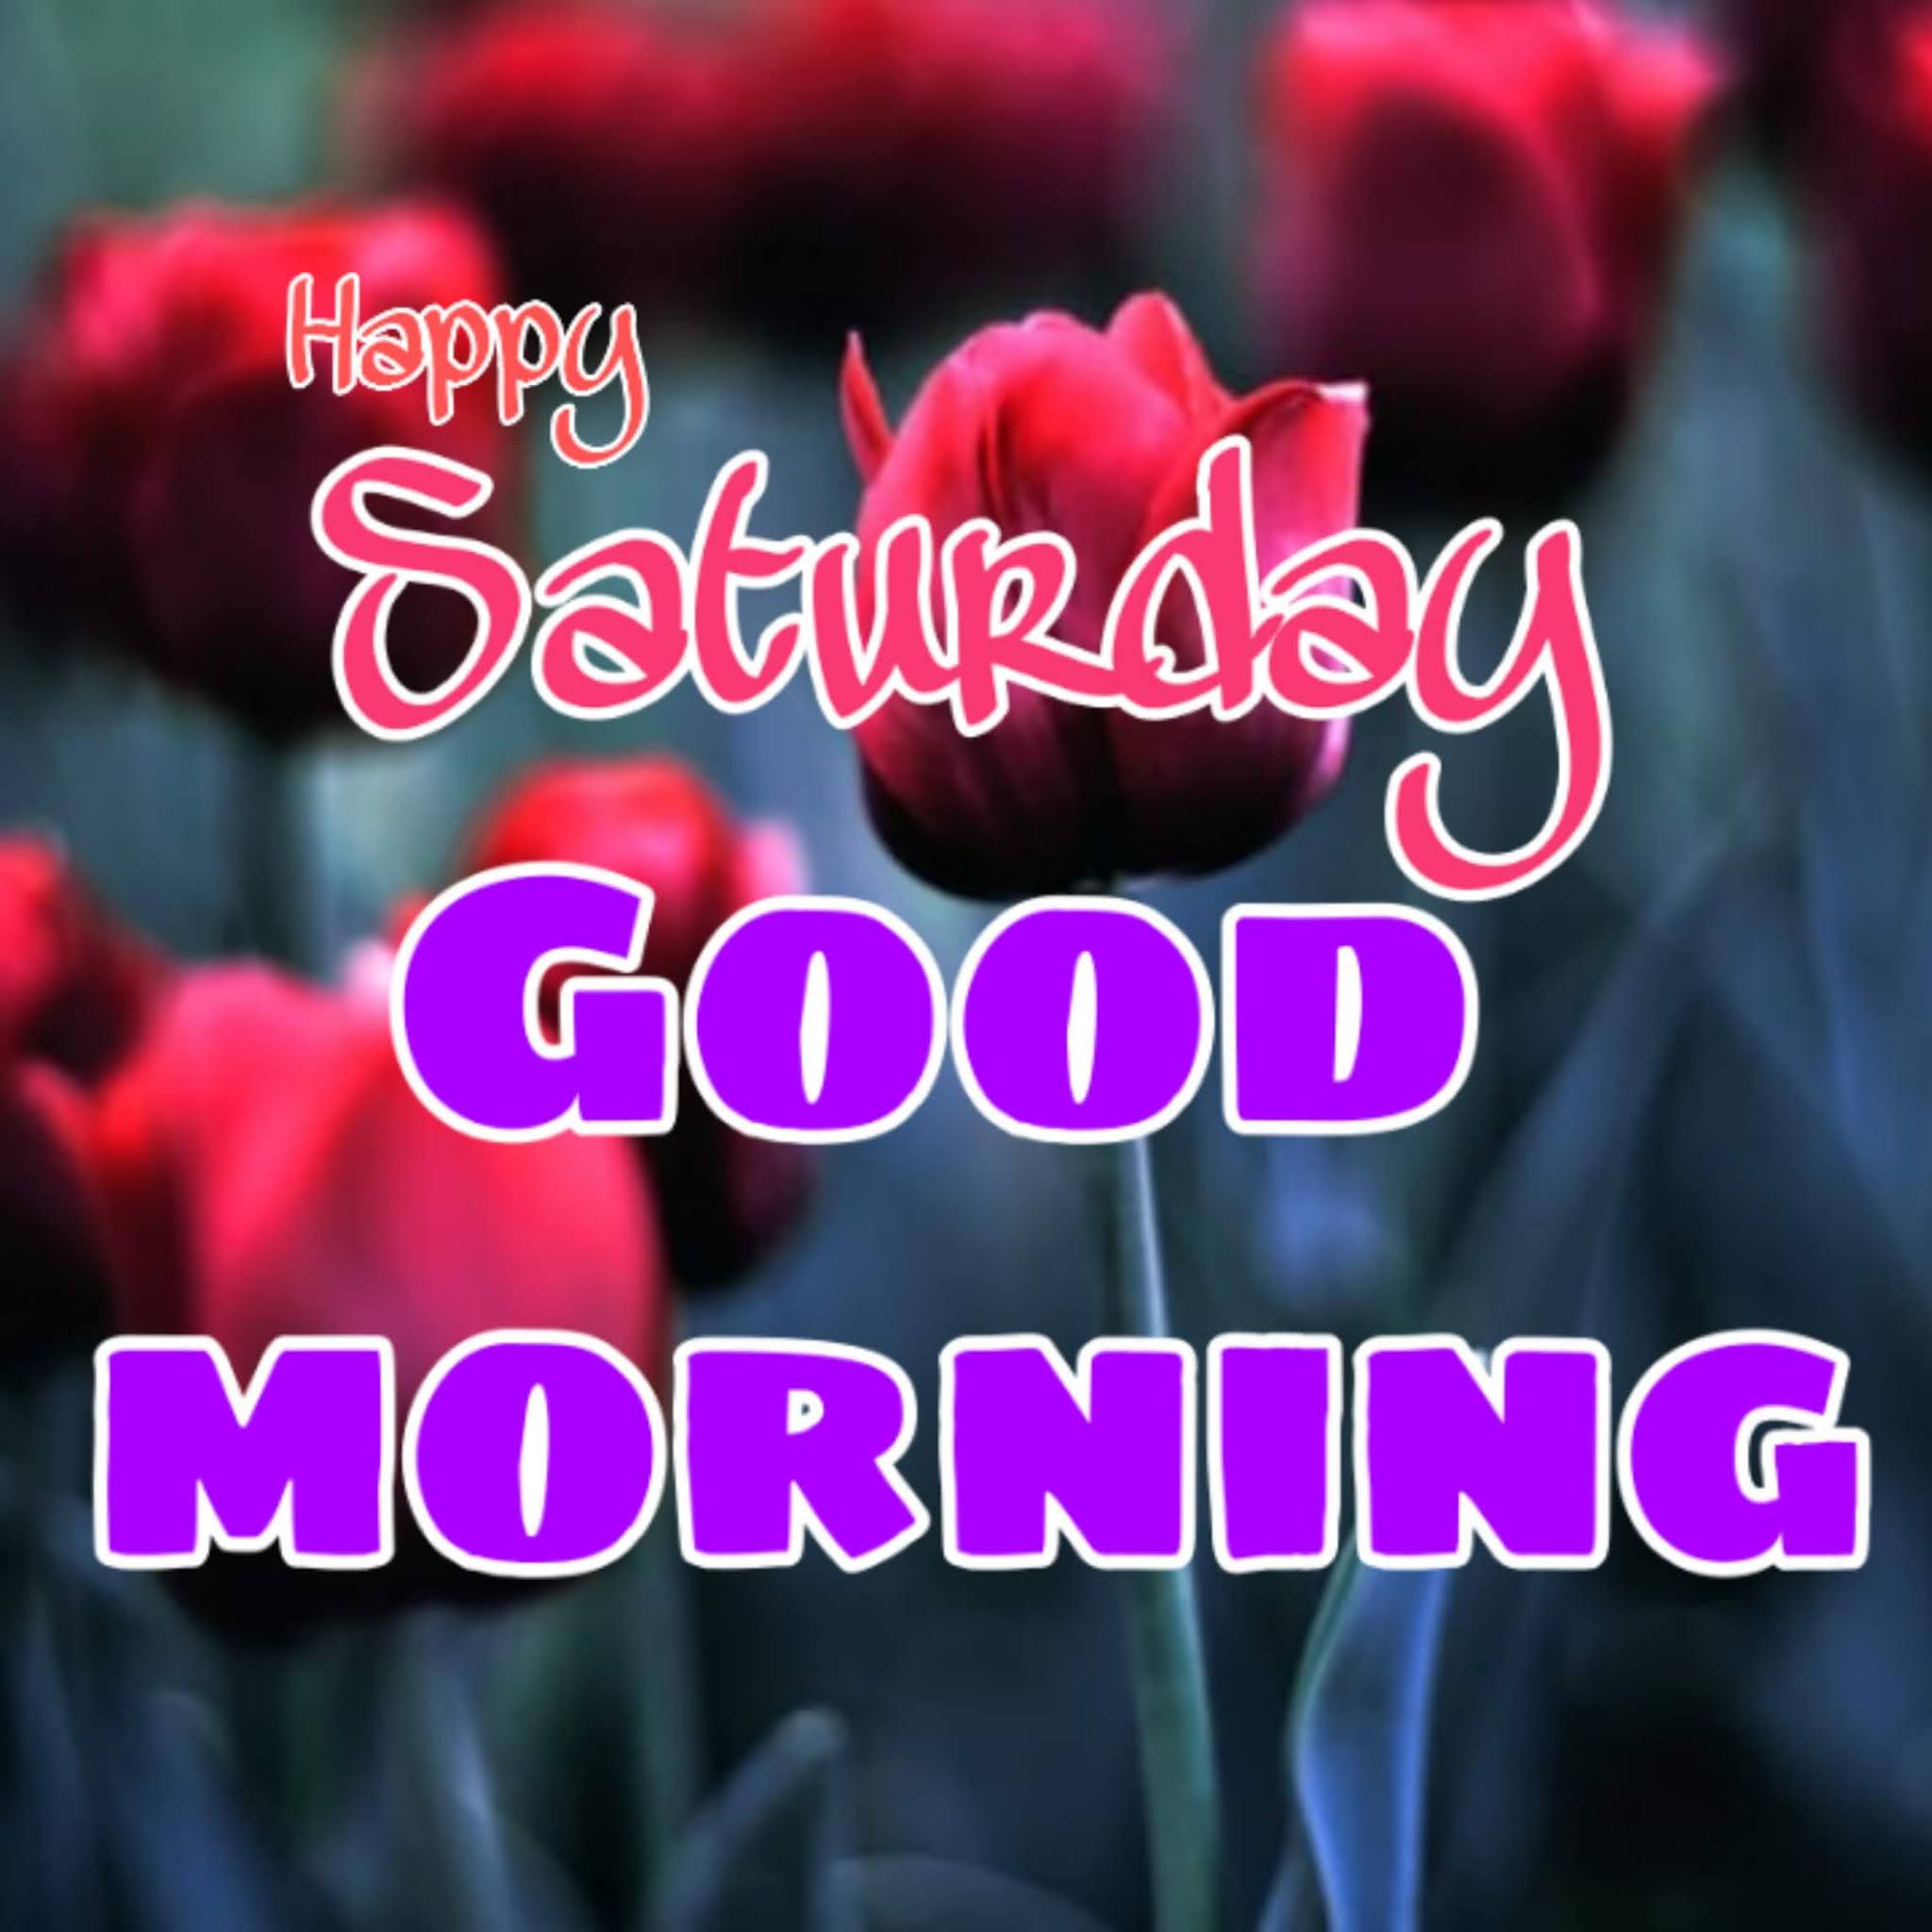 55 Good Morning Happy Saturday Images Pictures Photo Wallpaper Free Download Best Wishes Image